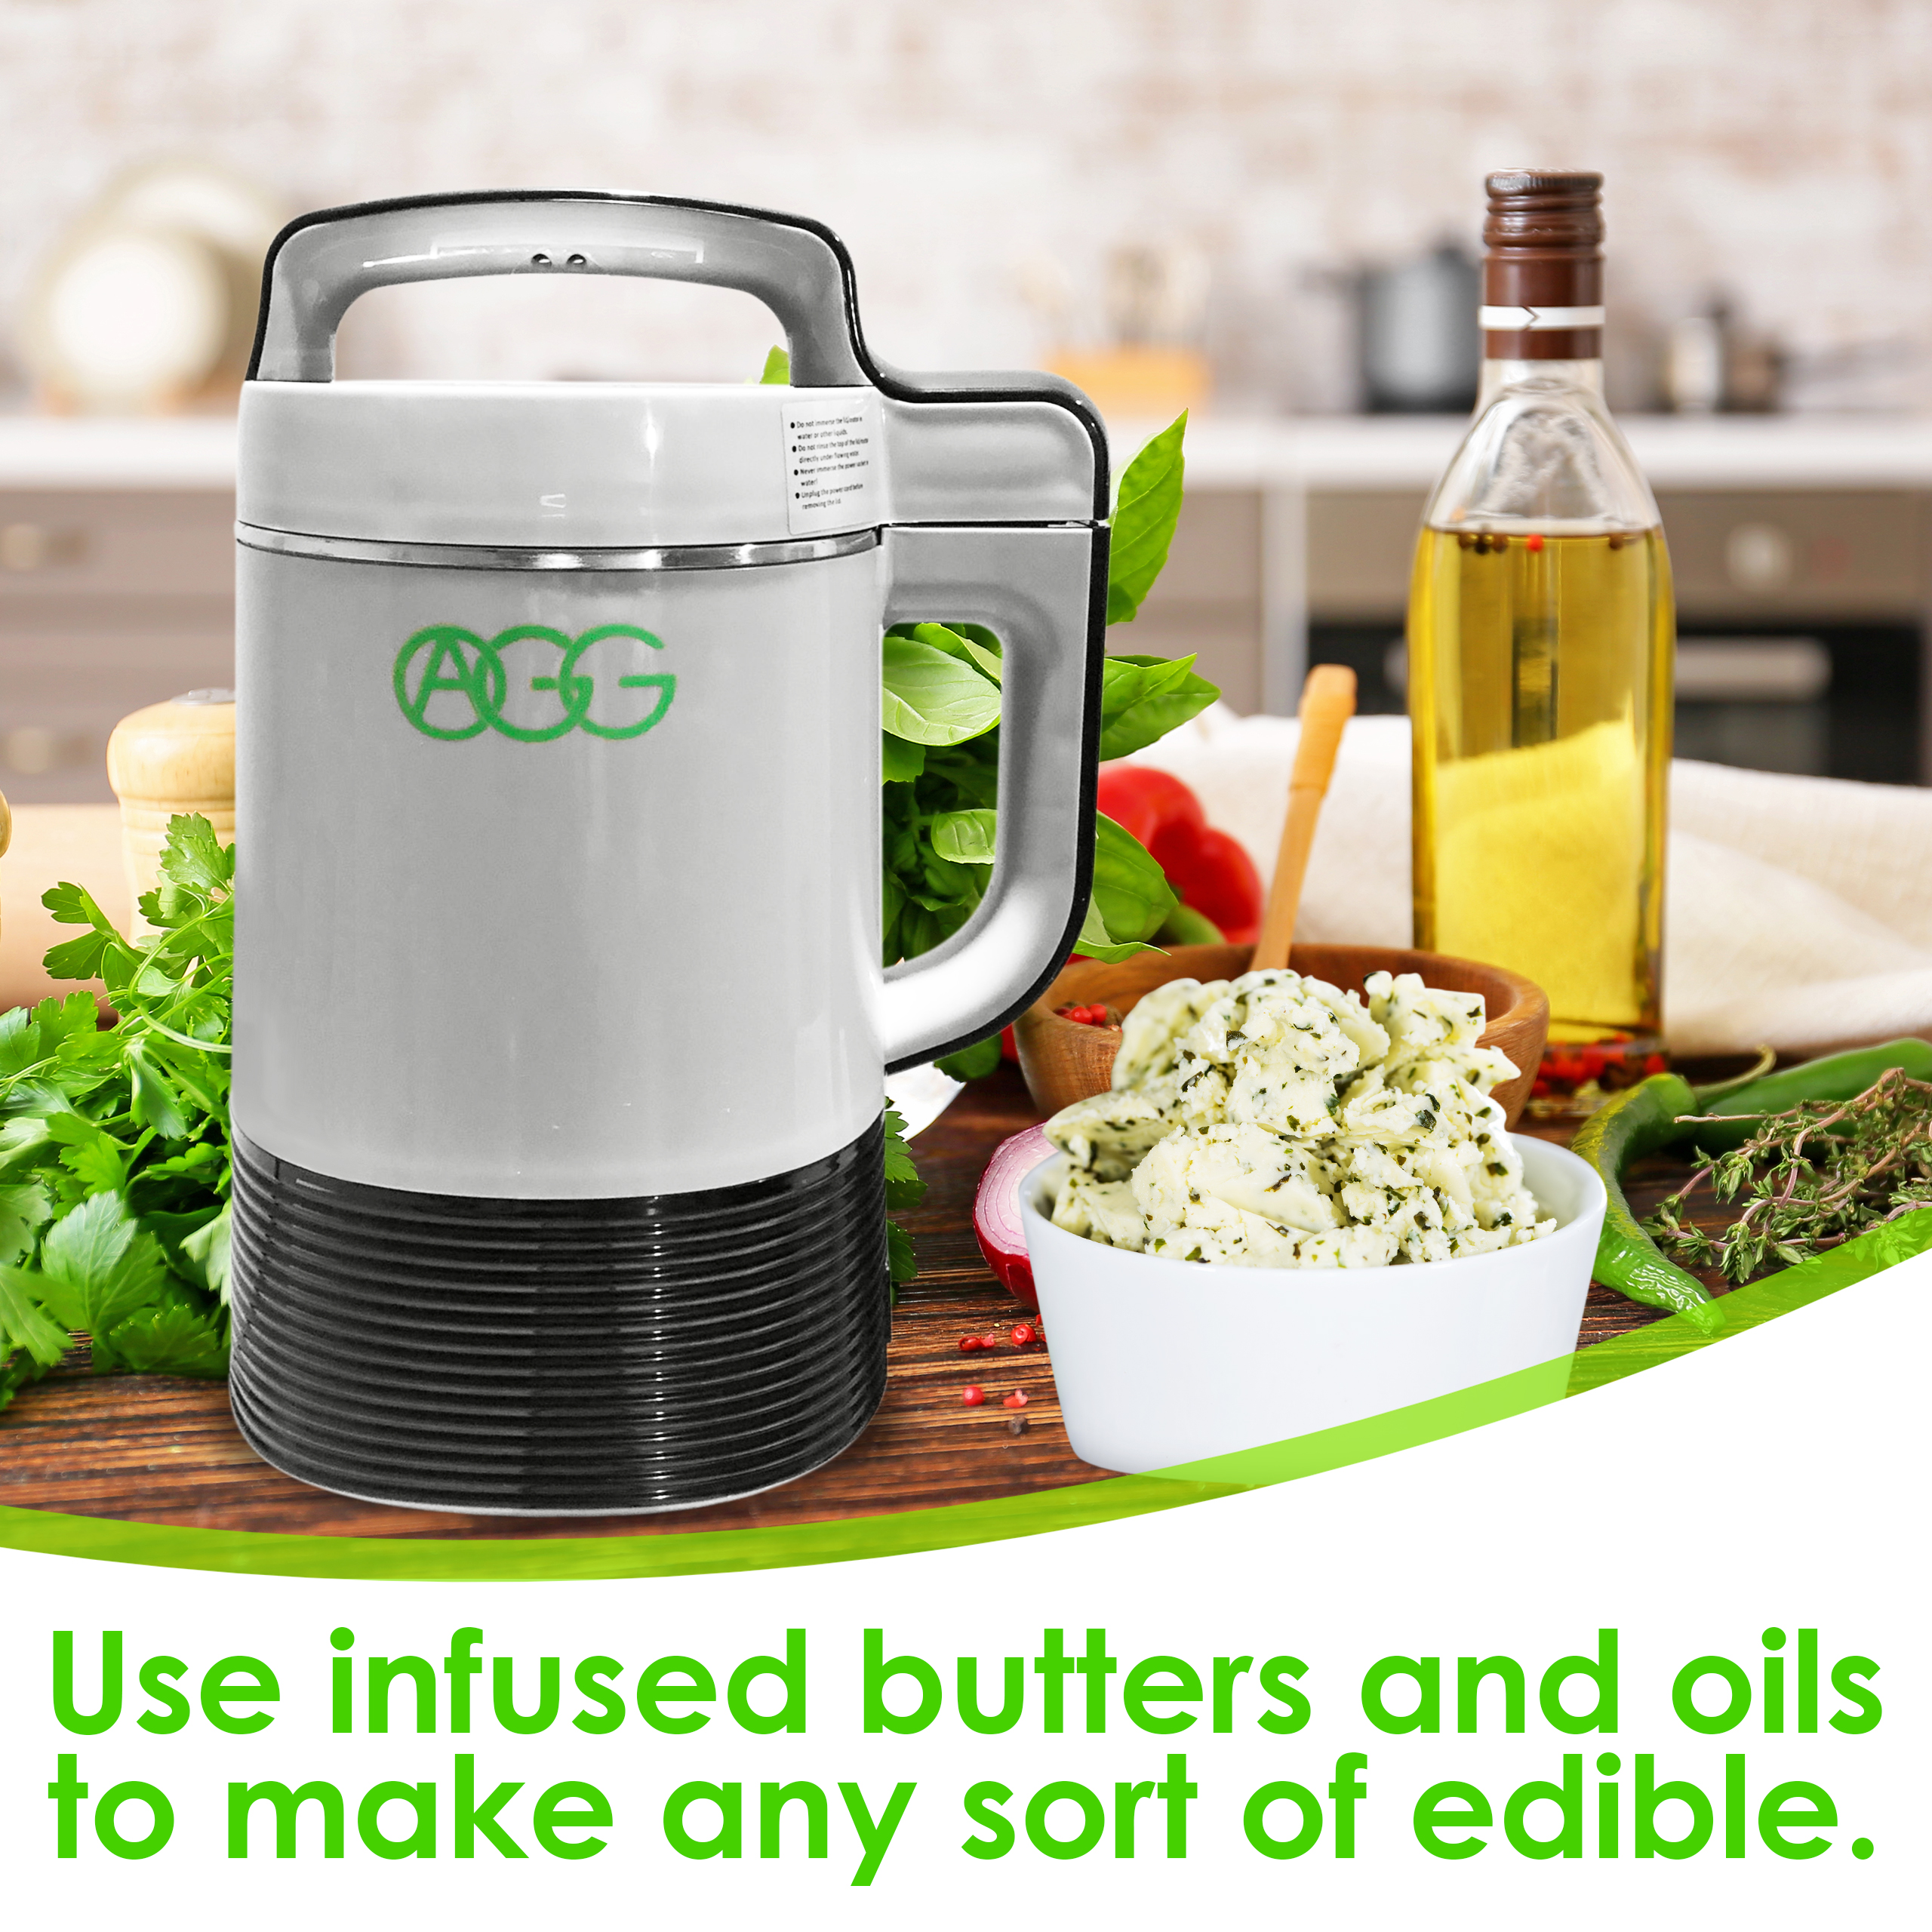 Electric Herbal Infuser: Infuse Butter, Oil & More w/ any Herb - image 2 of 5